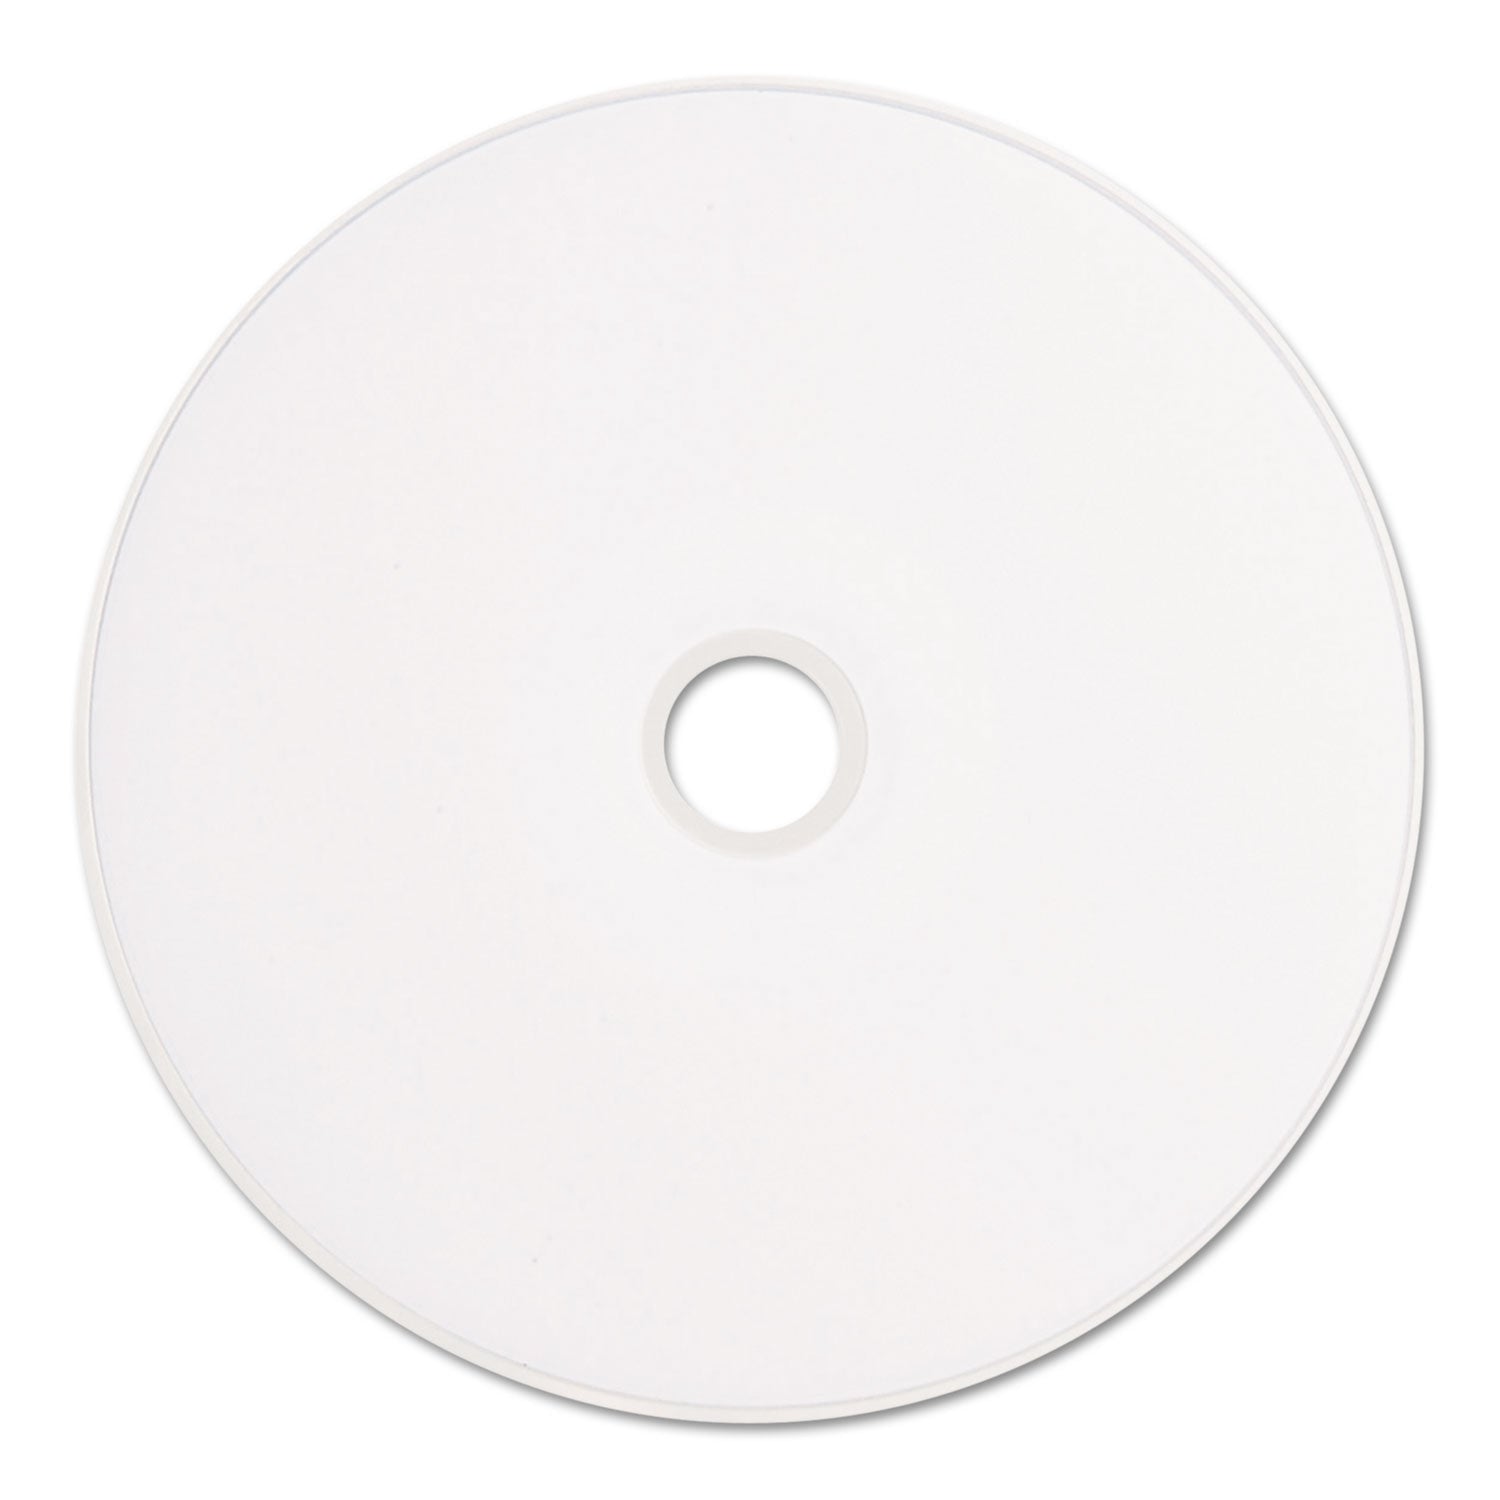 DVD+R Dual Layer Printable Recordable Disc, 8.5 GB, 8x, Spindle, White, 50/Pack - 